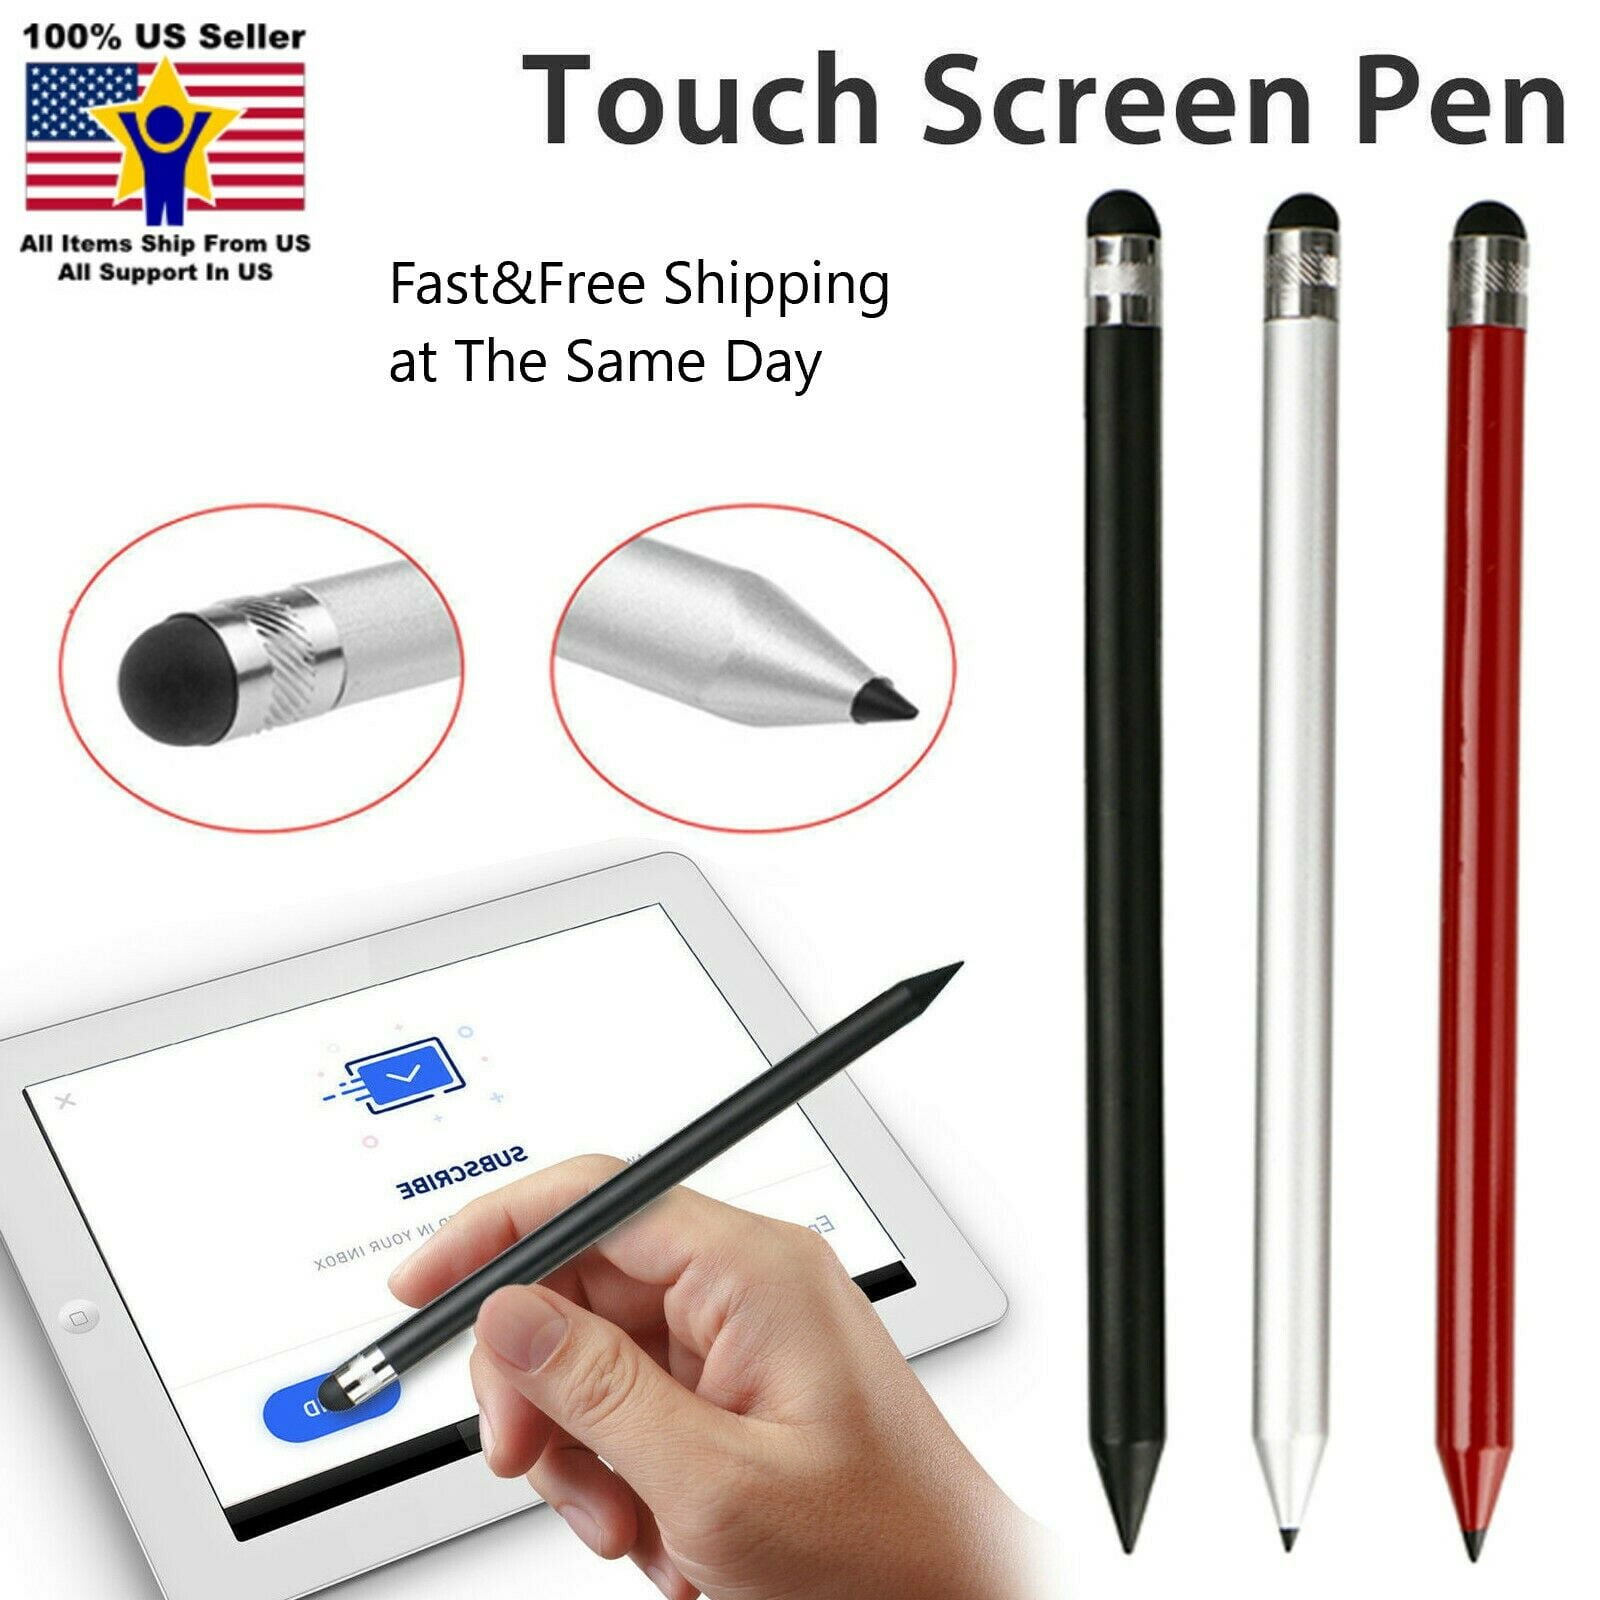 5 Pieces Universal Generic Stylus Touch Screen Pen for Touch Screen Devices 